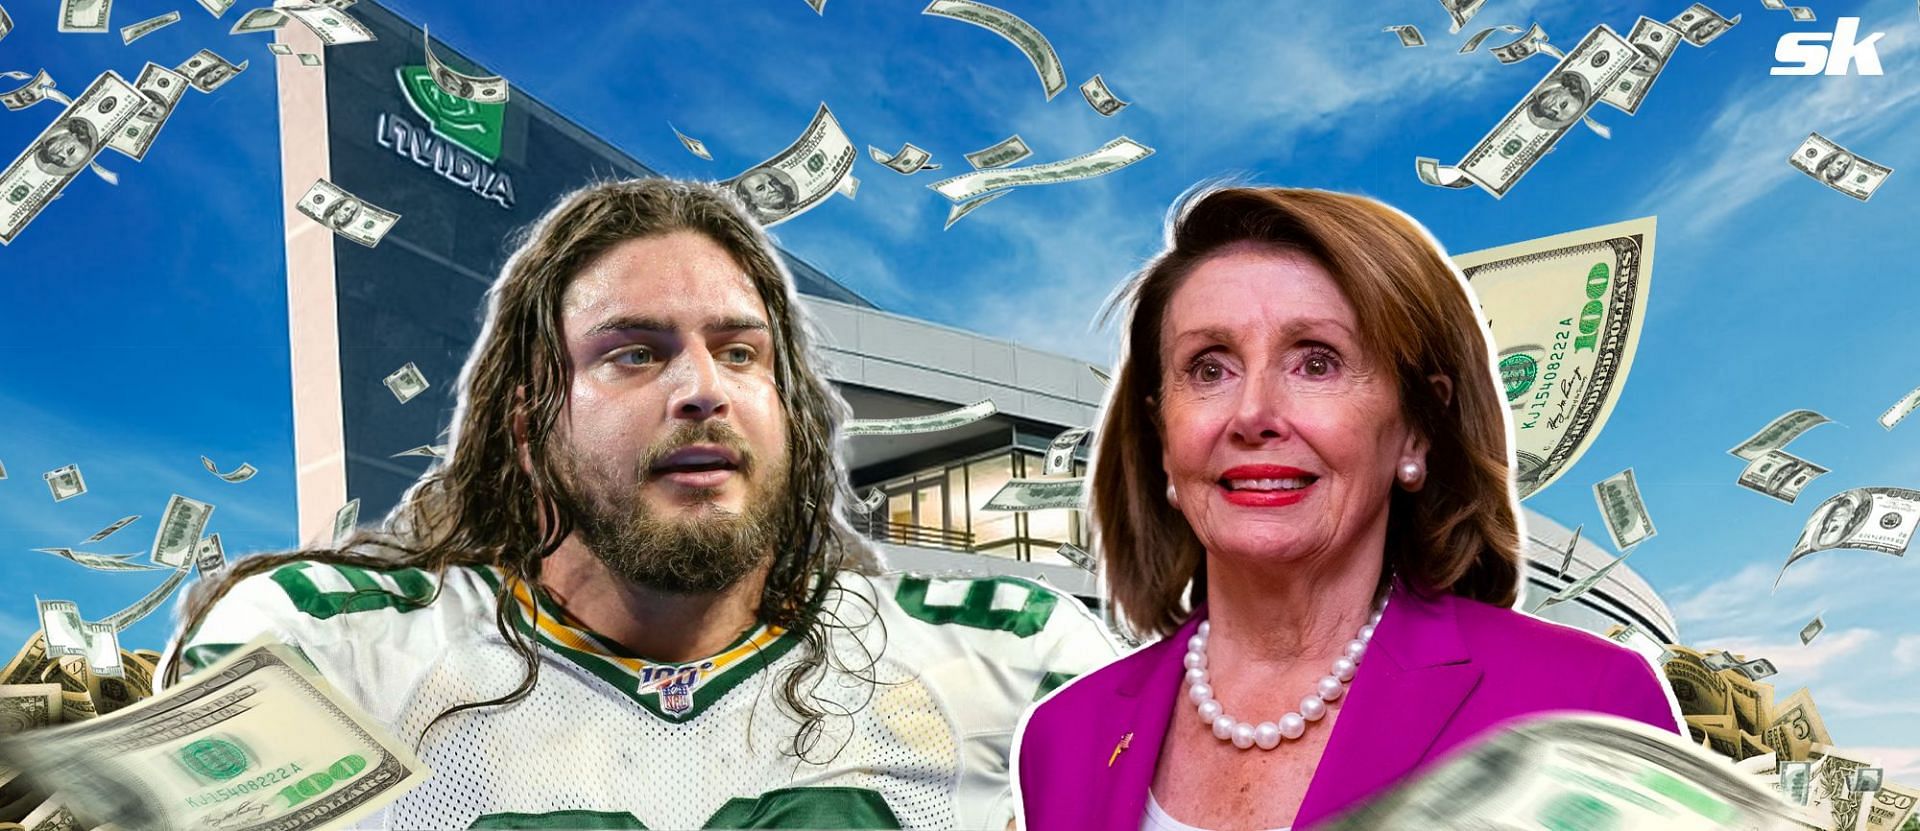 Packers OT David Bakhtiari claims Nancy Pelosi&rsquo;s &lsquo;going crazy with no accountability&rsquo; after $5,000,000 investment